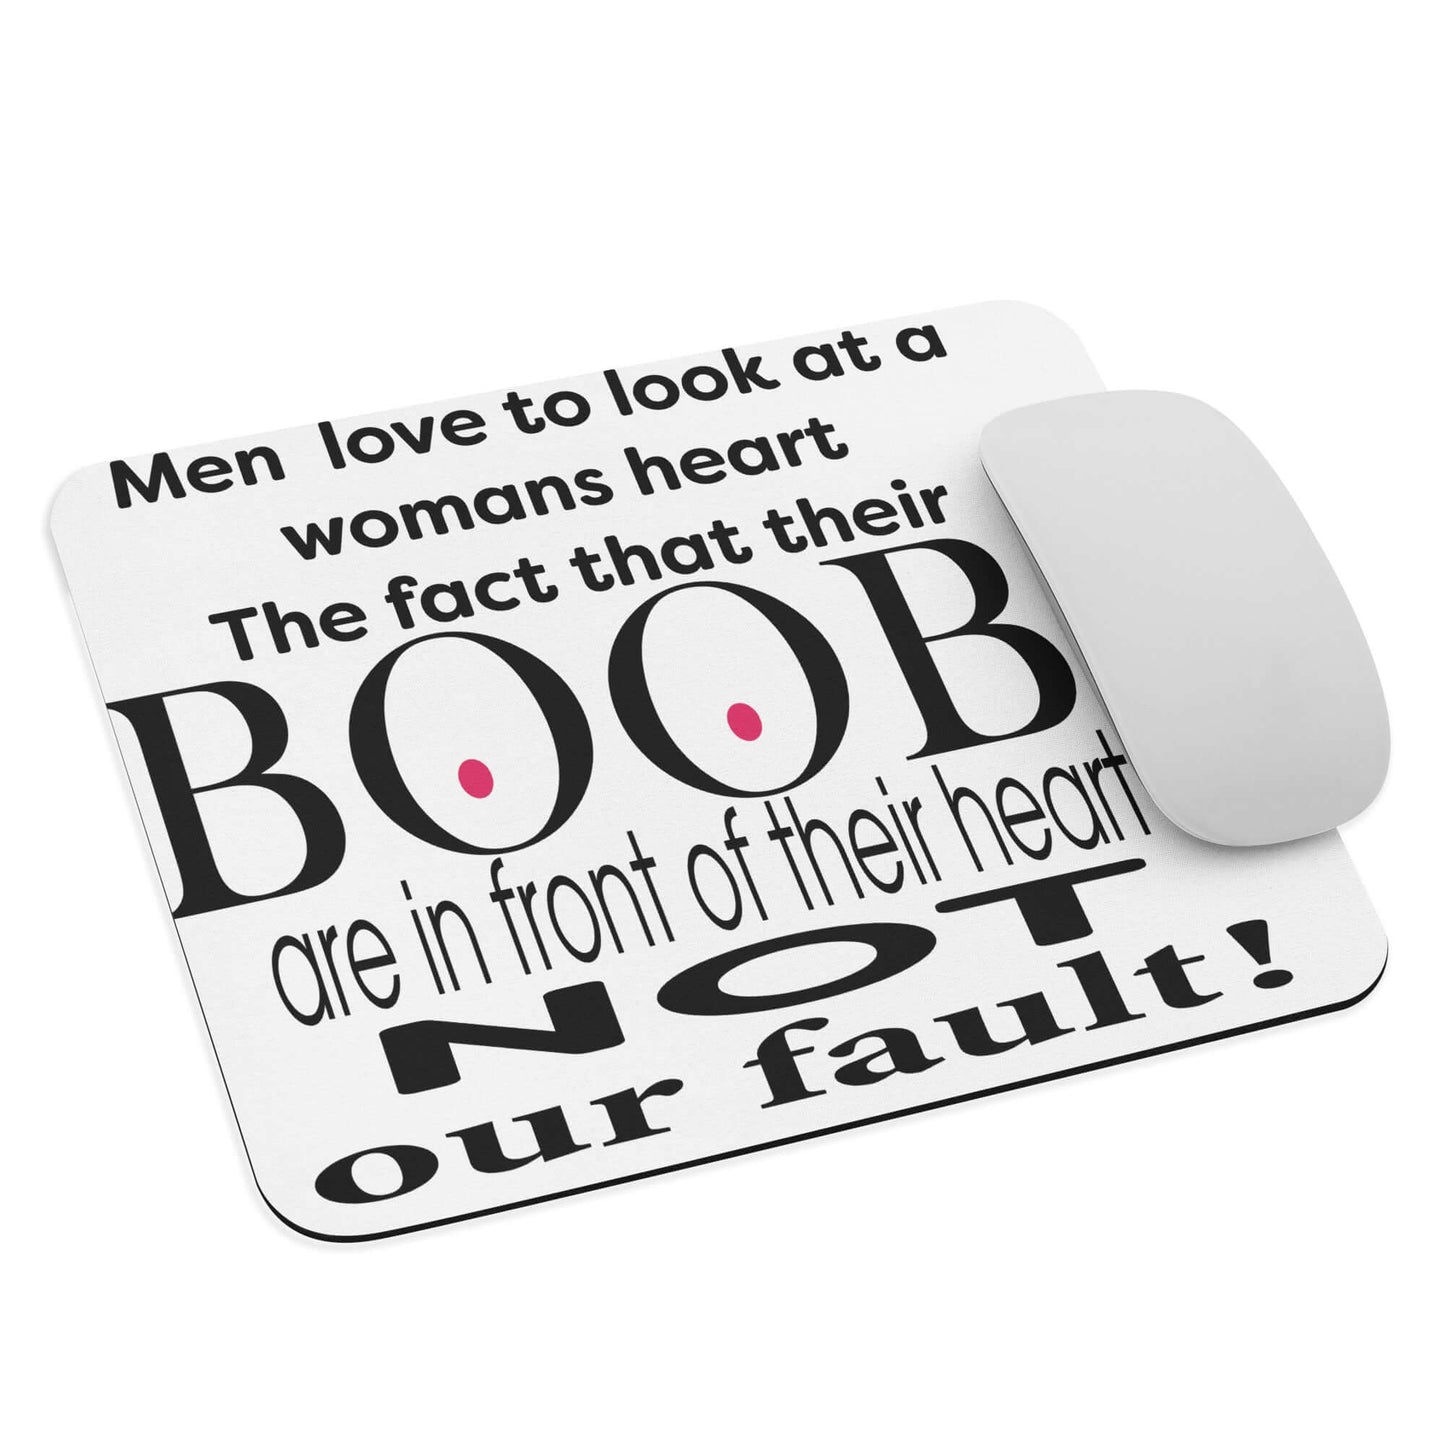 Men love to look at a womans heart. The fact that their BOOBS are in the way is not our fault - Mouse pad - Horrible Designs